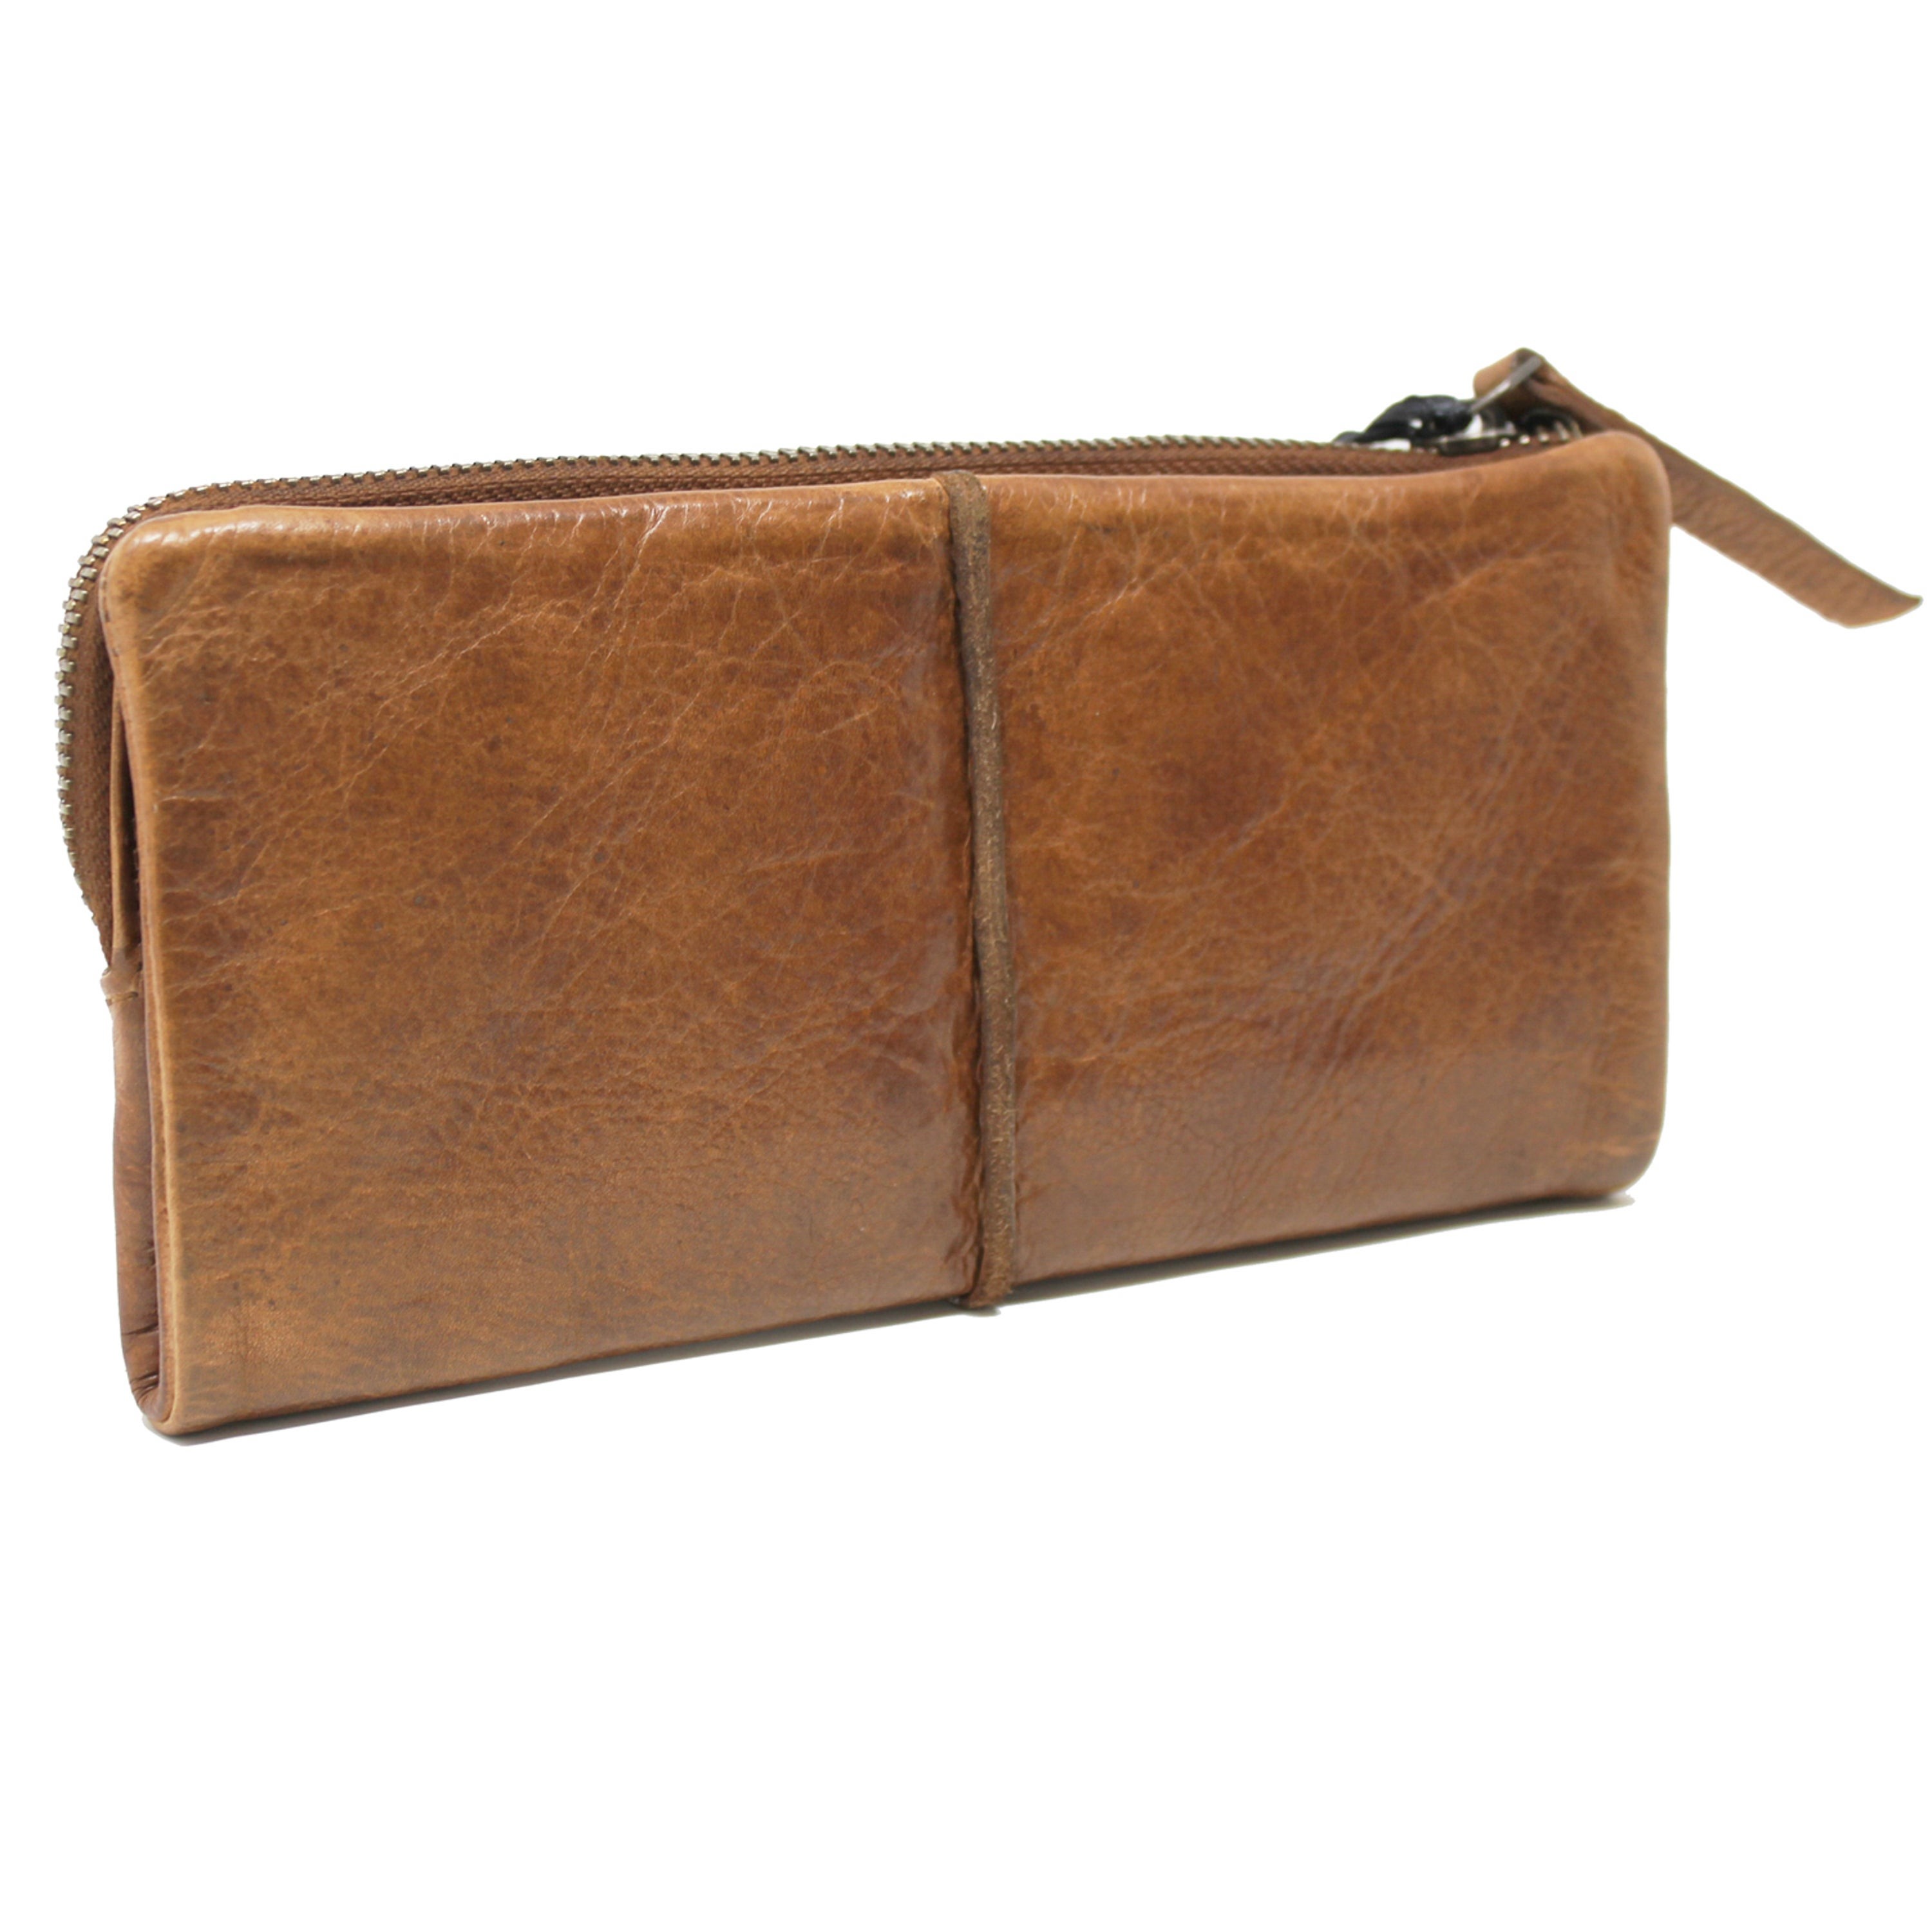 Andi Leather Wallet Cognac